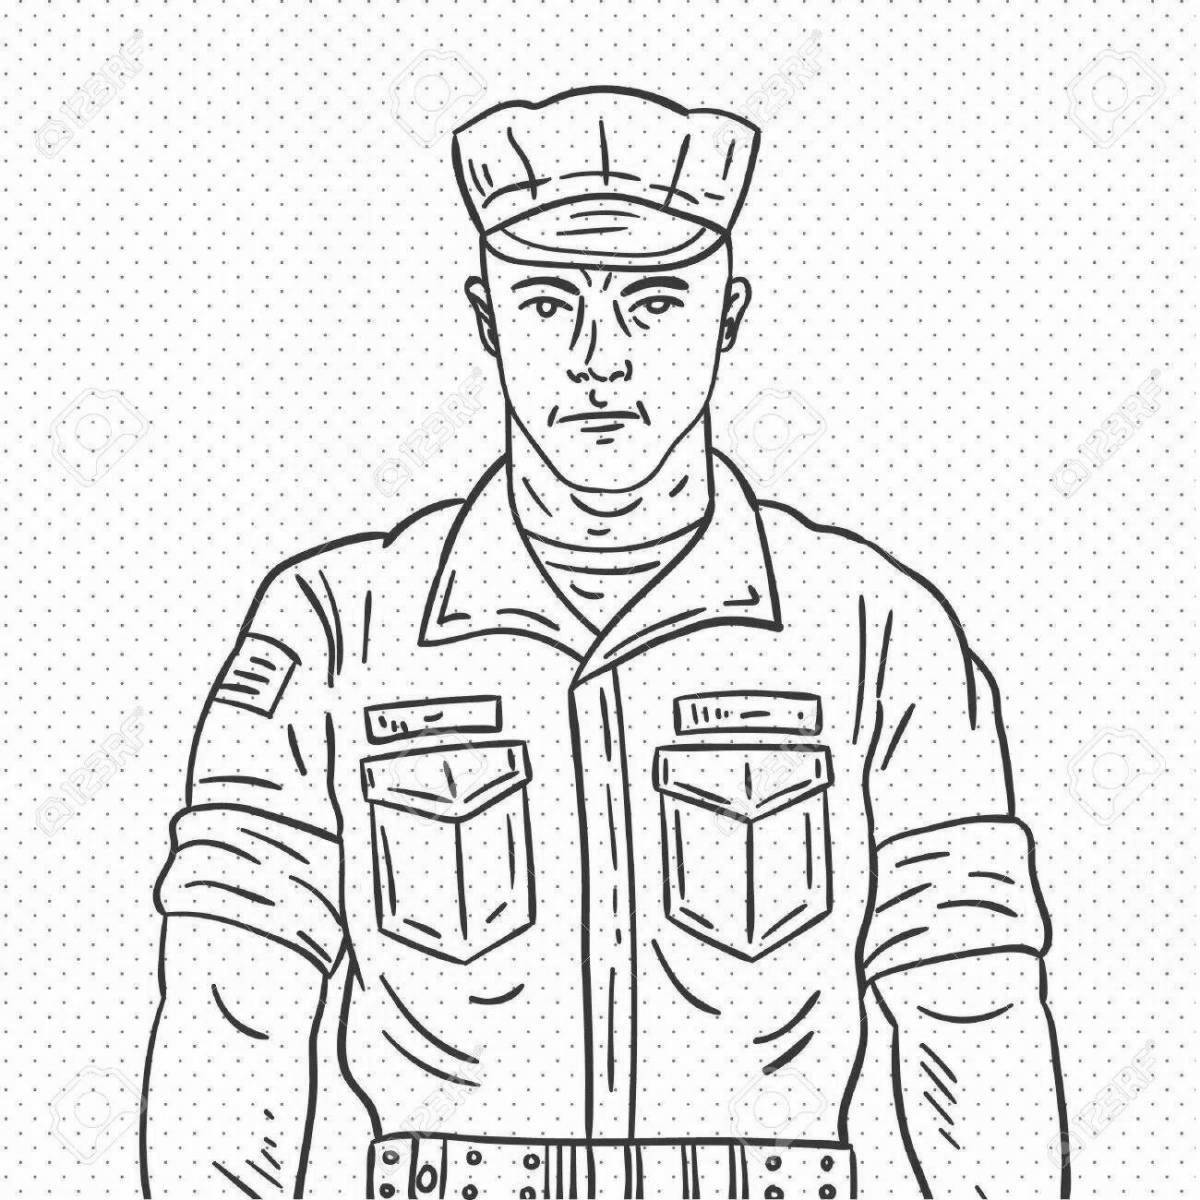 Playful soldier face coloring page for kids